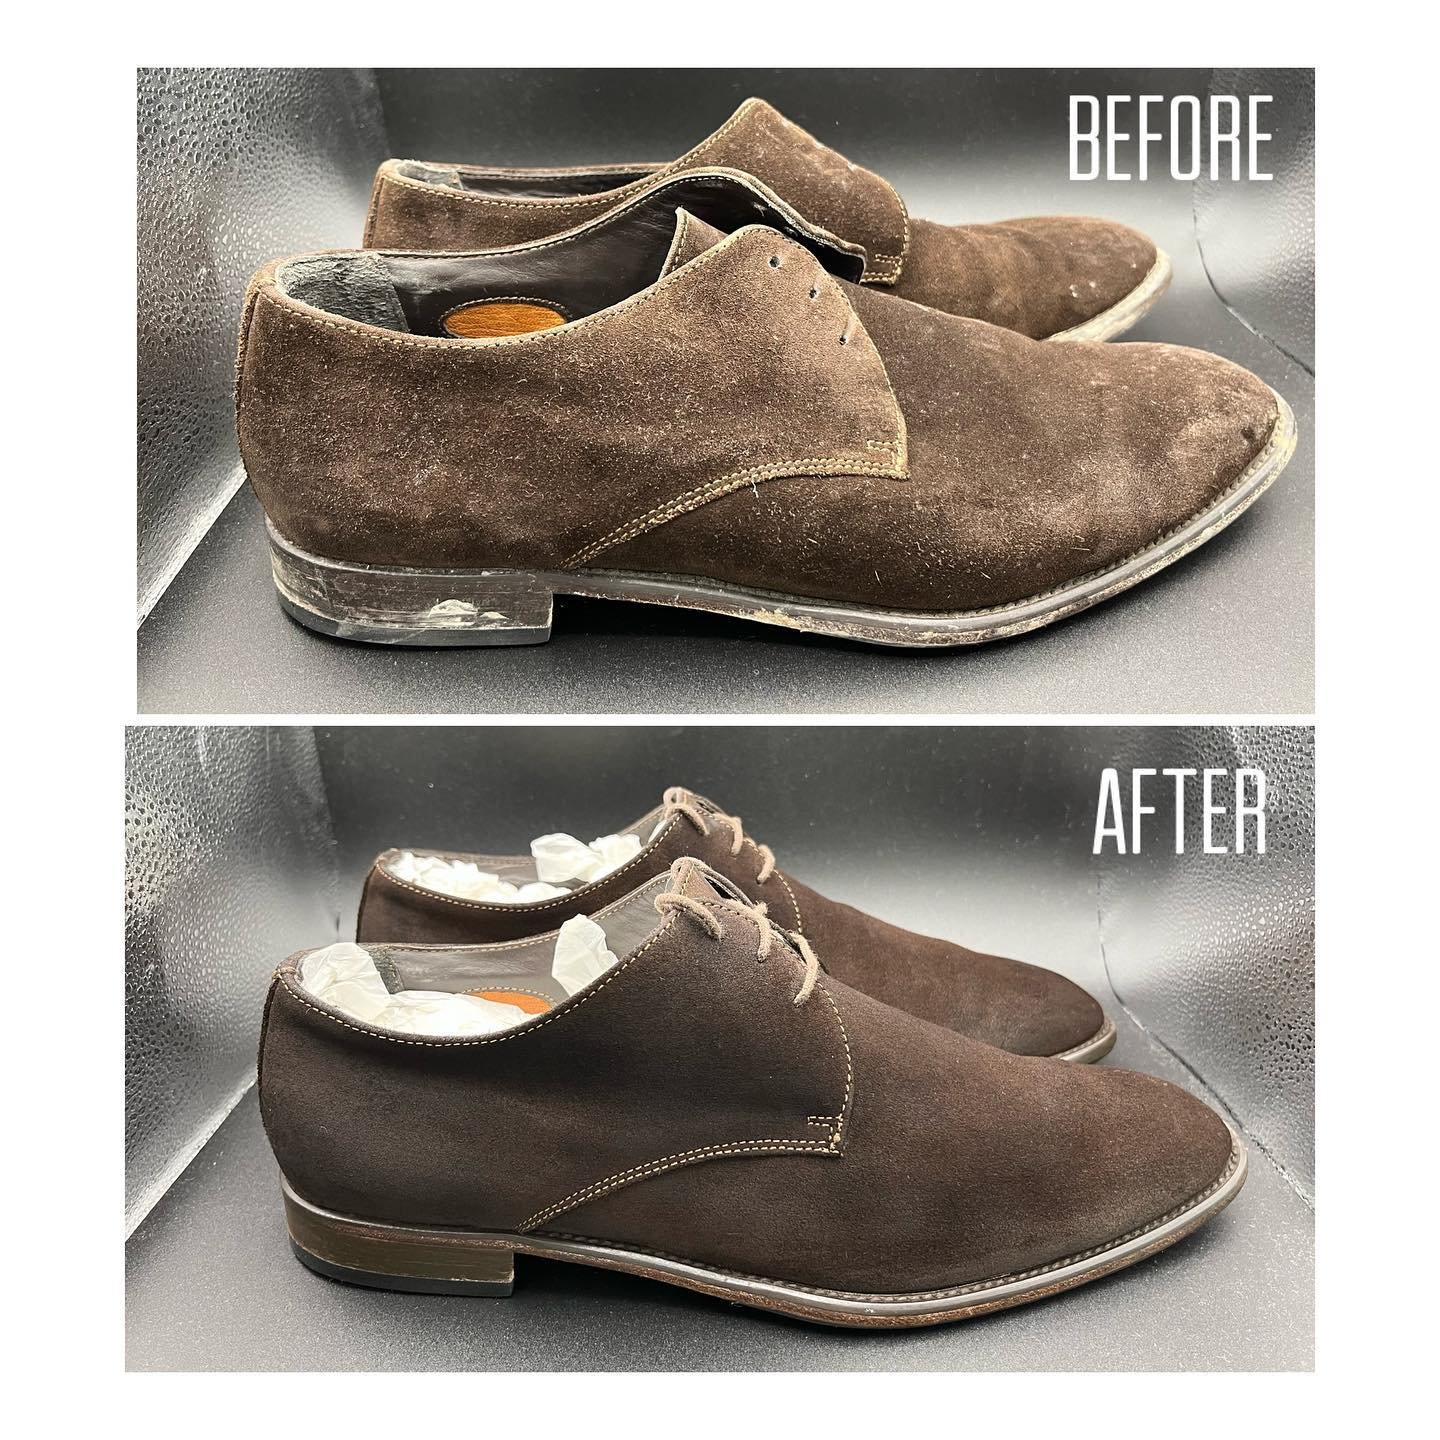 Getting that suede fresh again after a few mad nights!! You wear them and we&rsquo;ll clean them!! #justforkicks #suede #suedeshoes #brownsuede #kicks #messynight ##dublin #ireland #dublintown #dublincity #shoecleaner #shoecleaning #shoecleaningservi